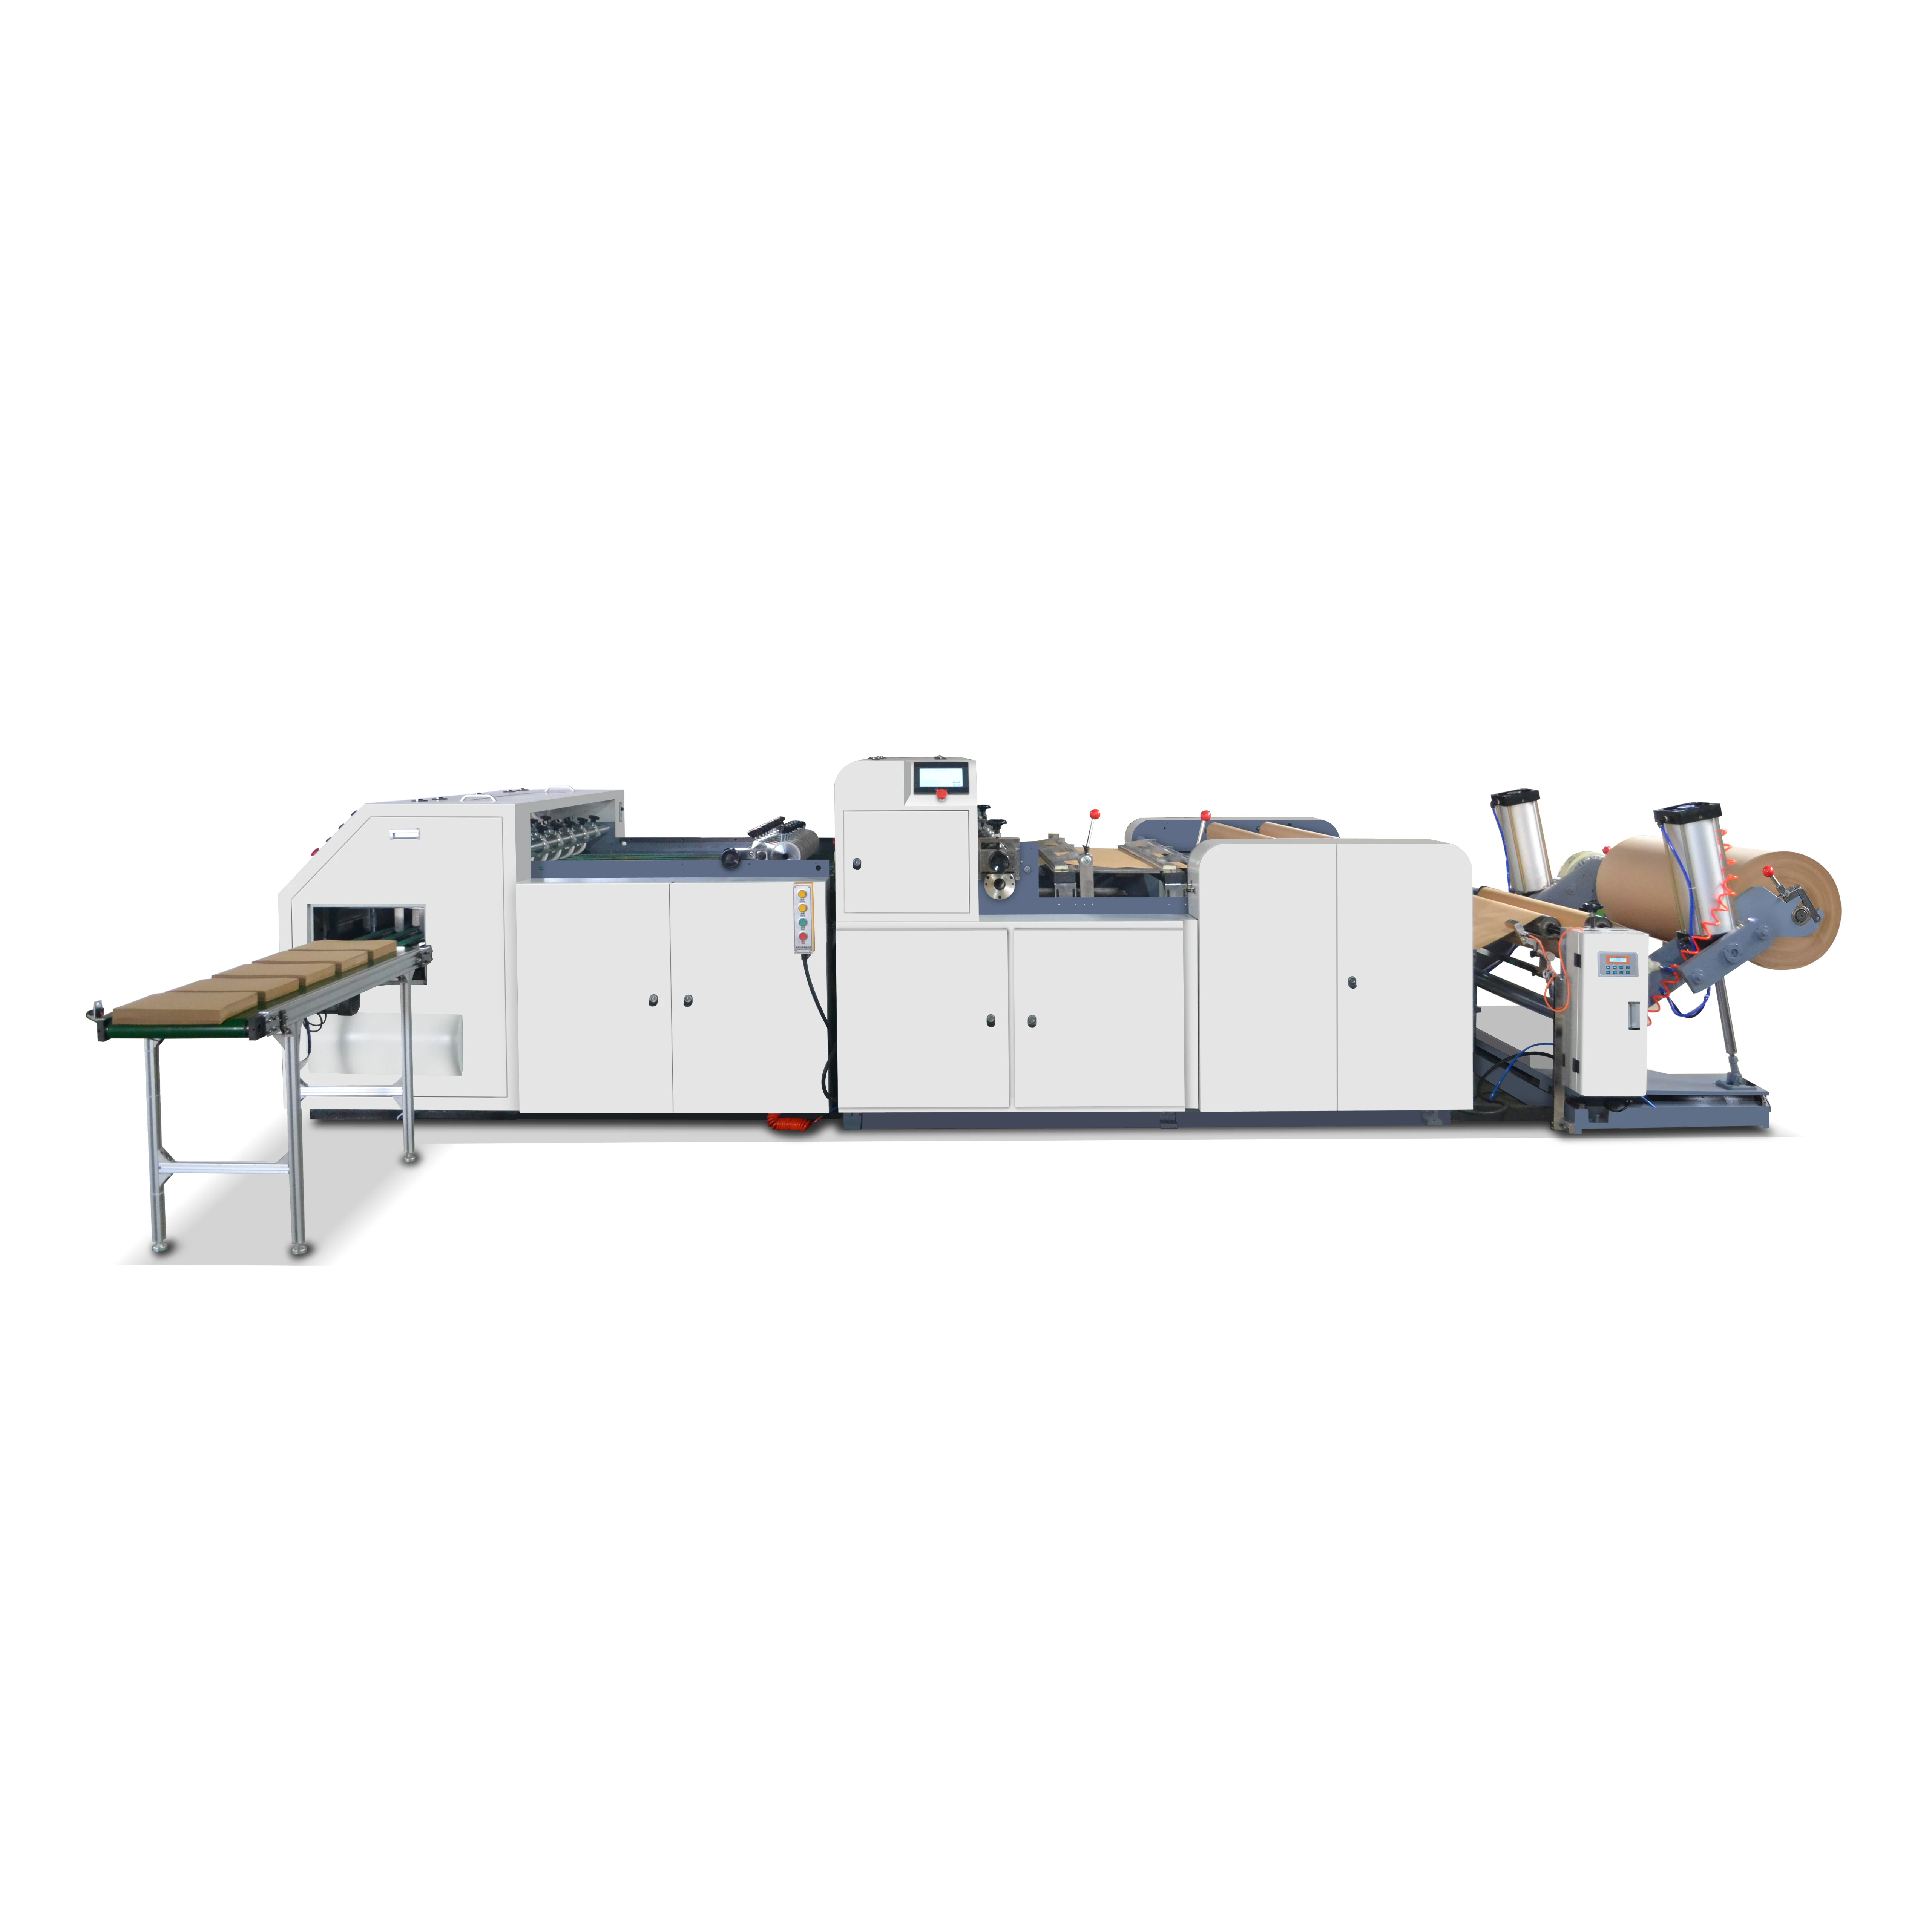 
RTH-1400A4 automatic web packing material roll to sheet cutting A4 paper machine 